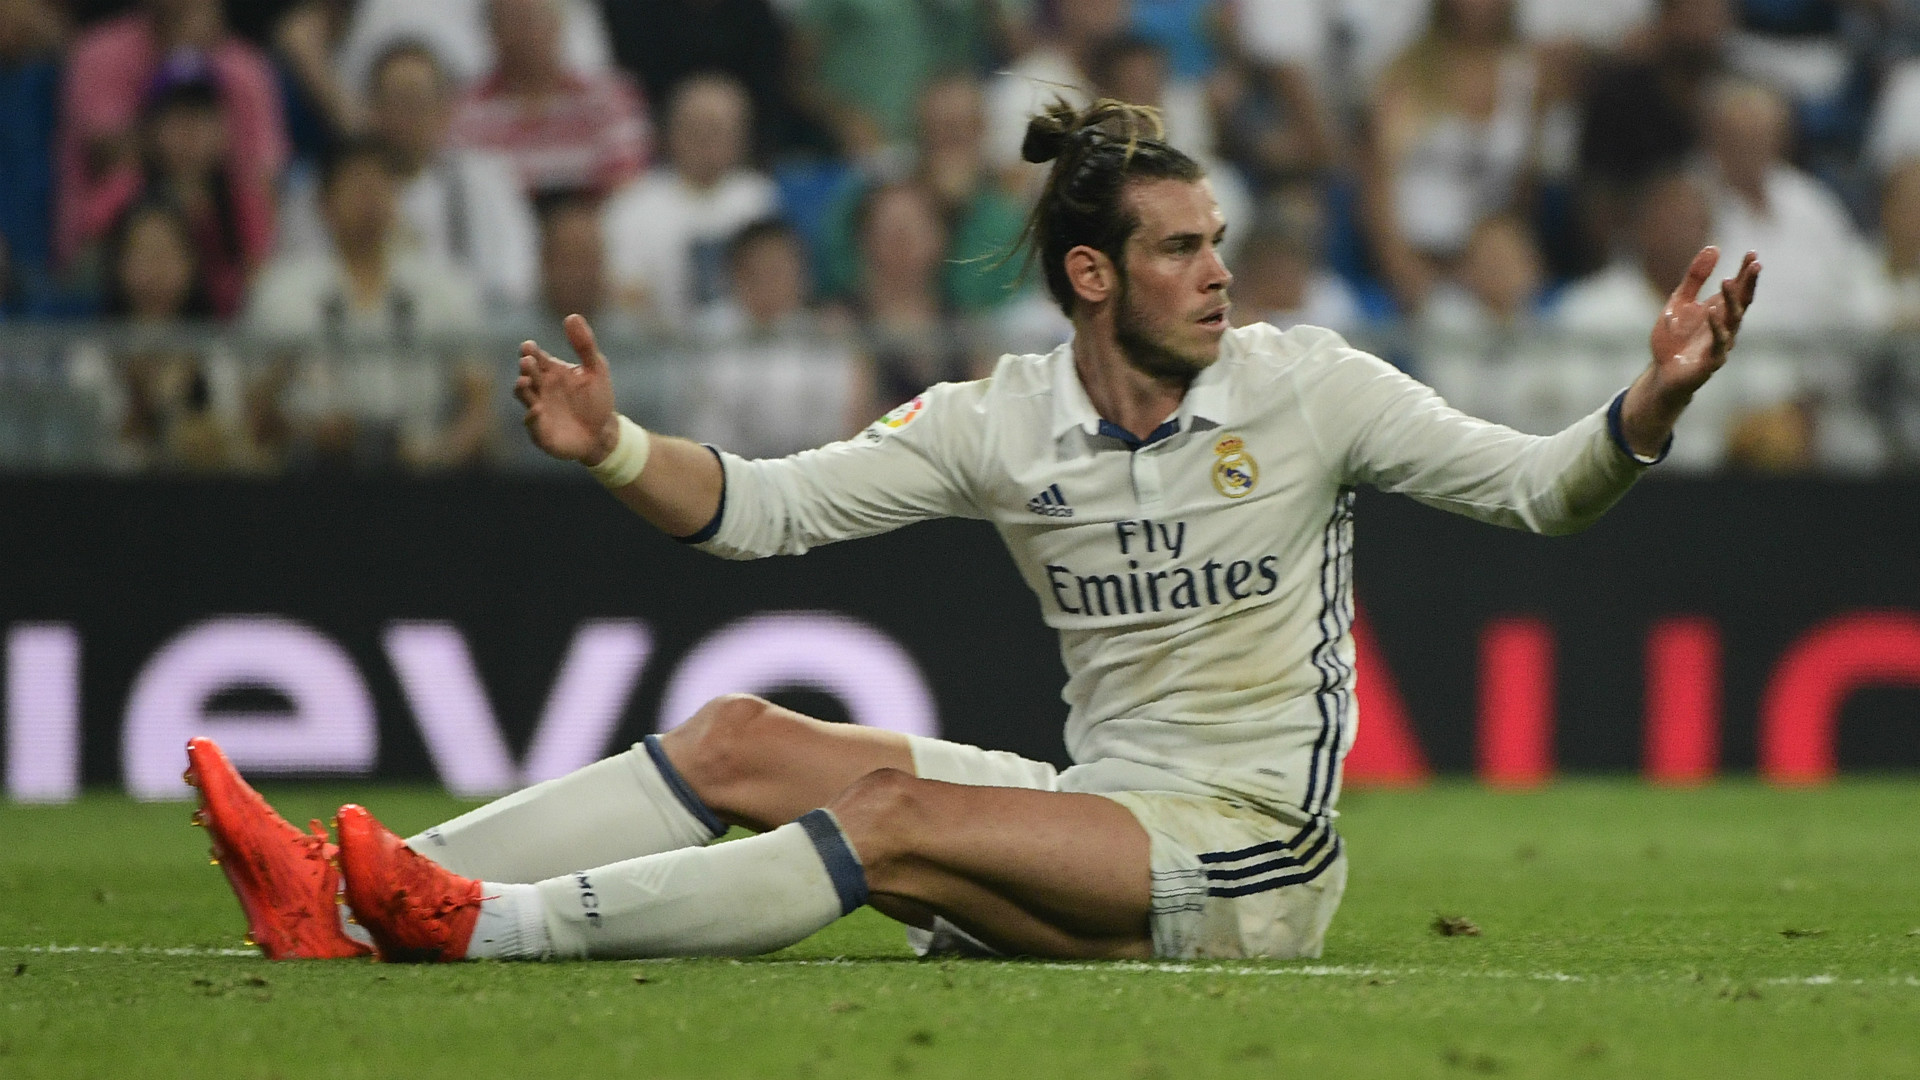 1920x1080 RUMORS: Manchester United plans Bale approach in 2017